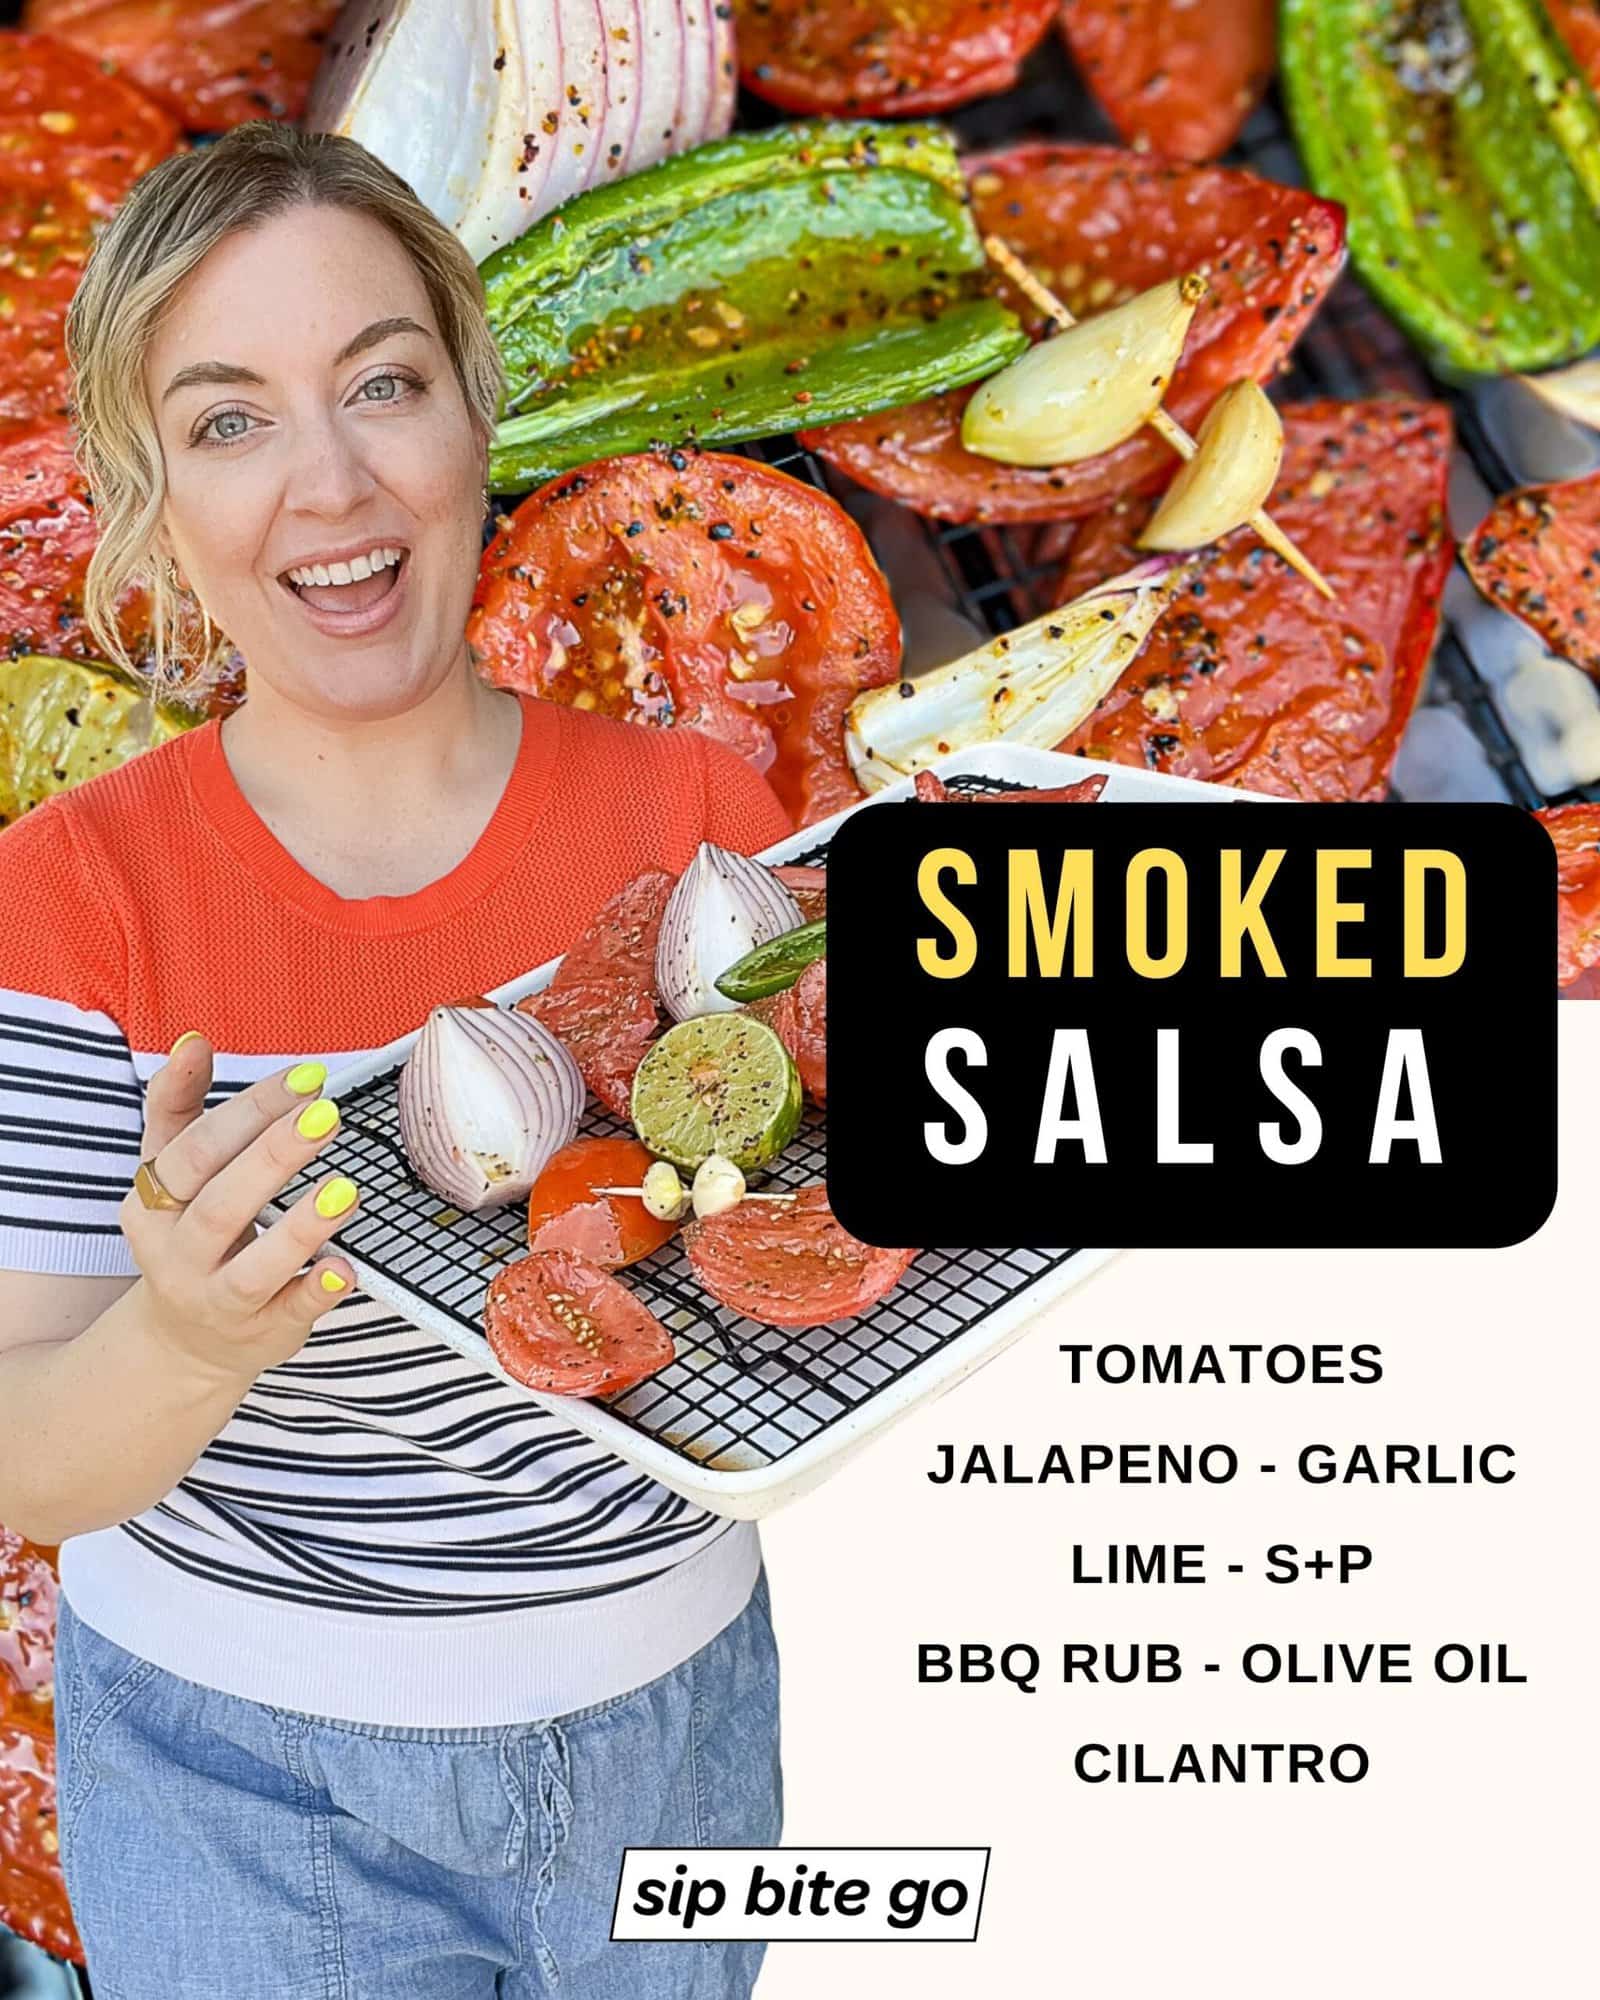 Infographic with recipe ingredients for making smoked salsa on the Traeger Pellet Grill with food blogger Jenna Passaro from Sip Bite Go